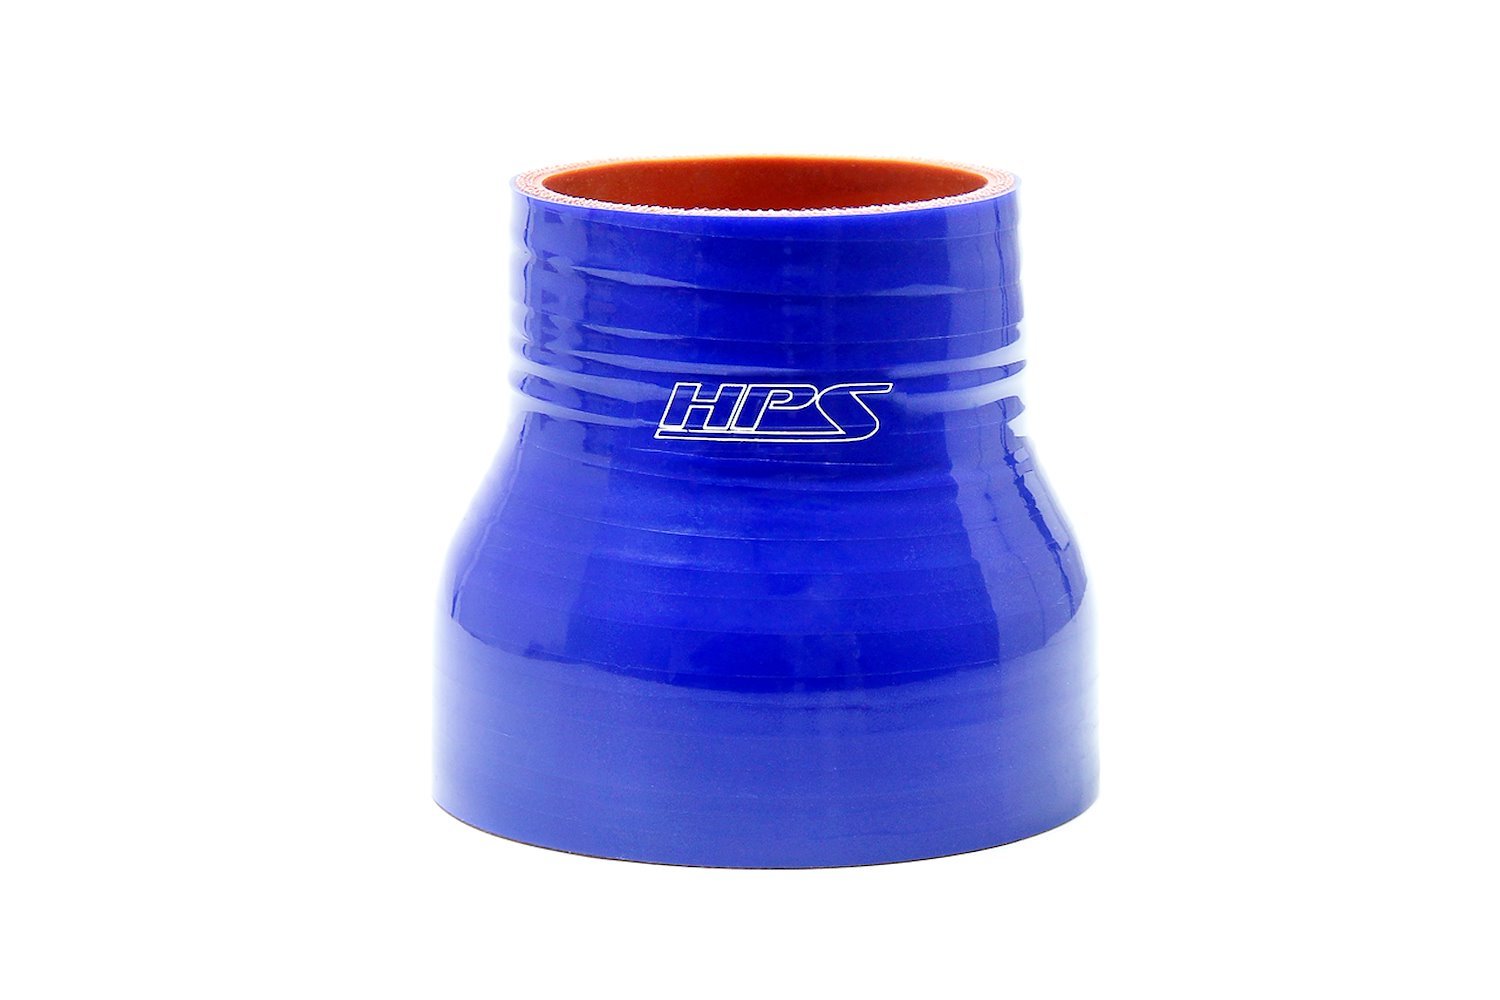 HTSR-325-400-BLUE Silicone Reducer Hose, High-Temp 4-Ply Reinforced, 3-1/4 in. - 4 in. ID, 3 in. Long, Blue